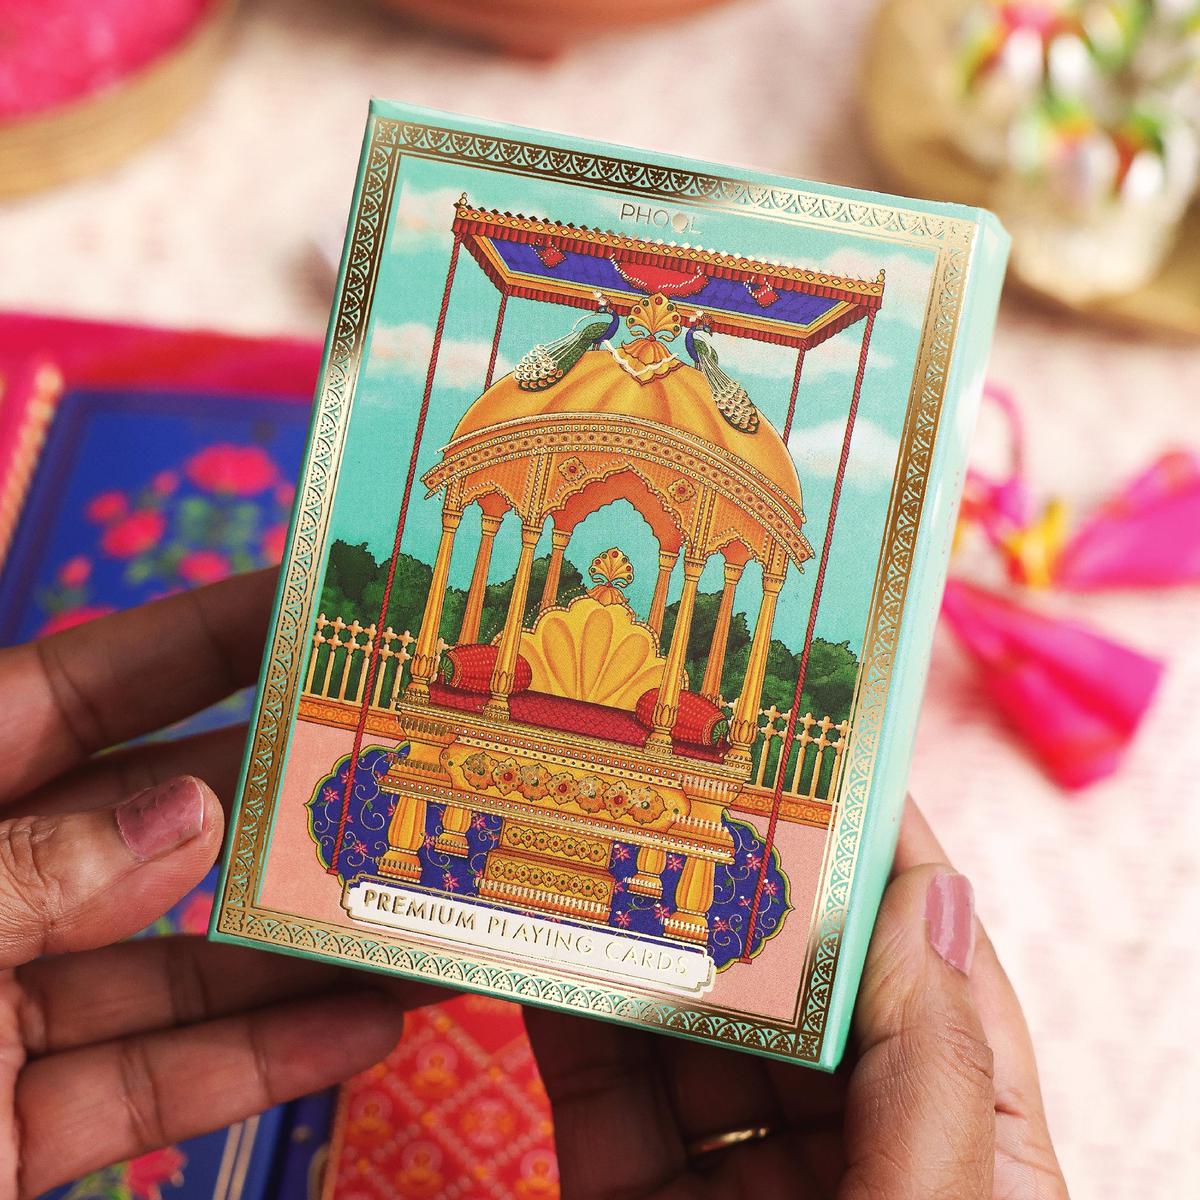  Collector’s edition Deepavali card game by Phool